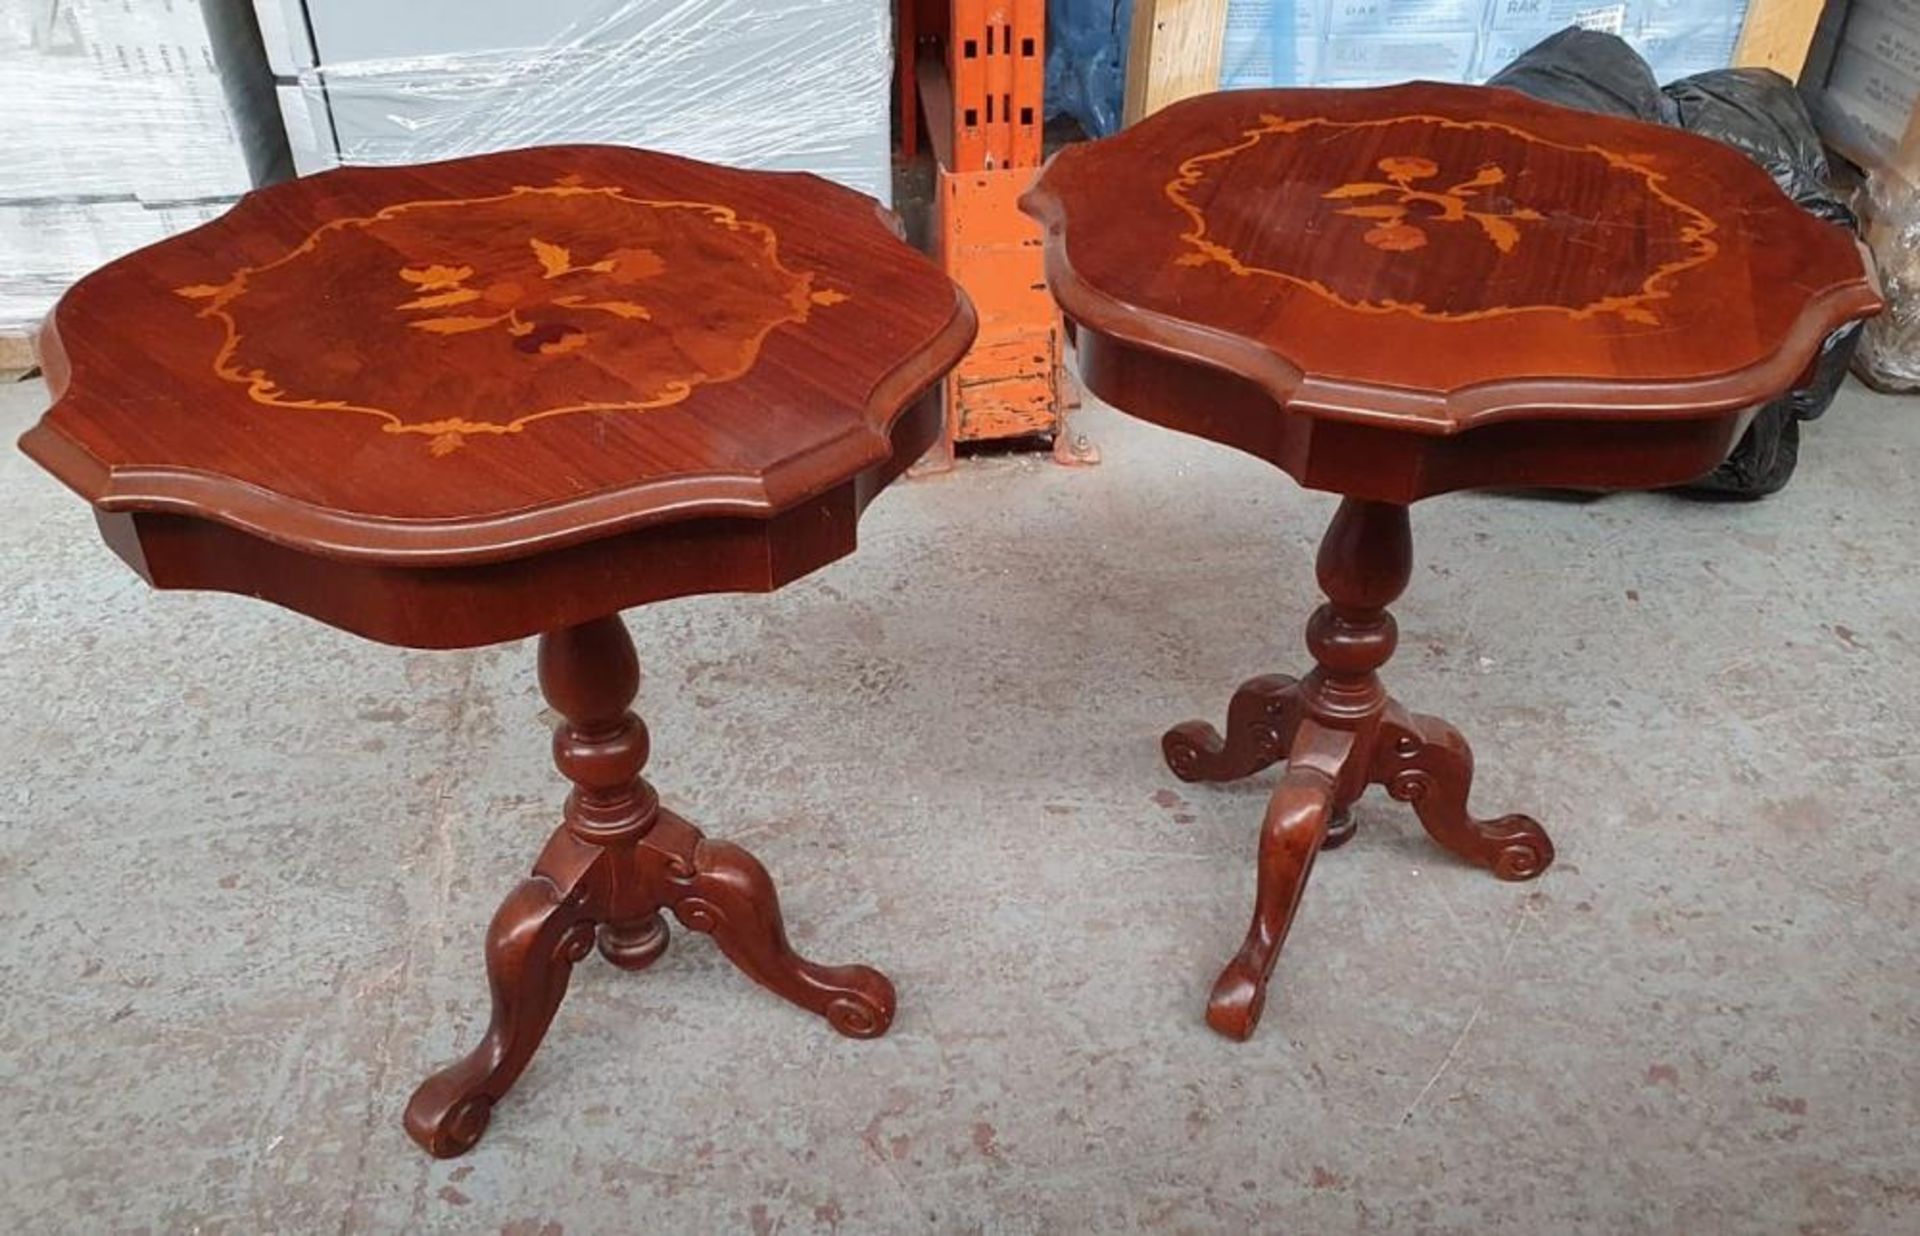 A Pair Of Period-Style Side / Lamp Tables With Ornate Legs - Unused Boxed Stock - £1 Start, No Reser